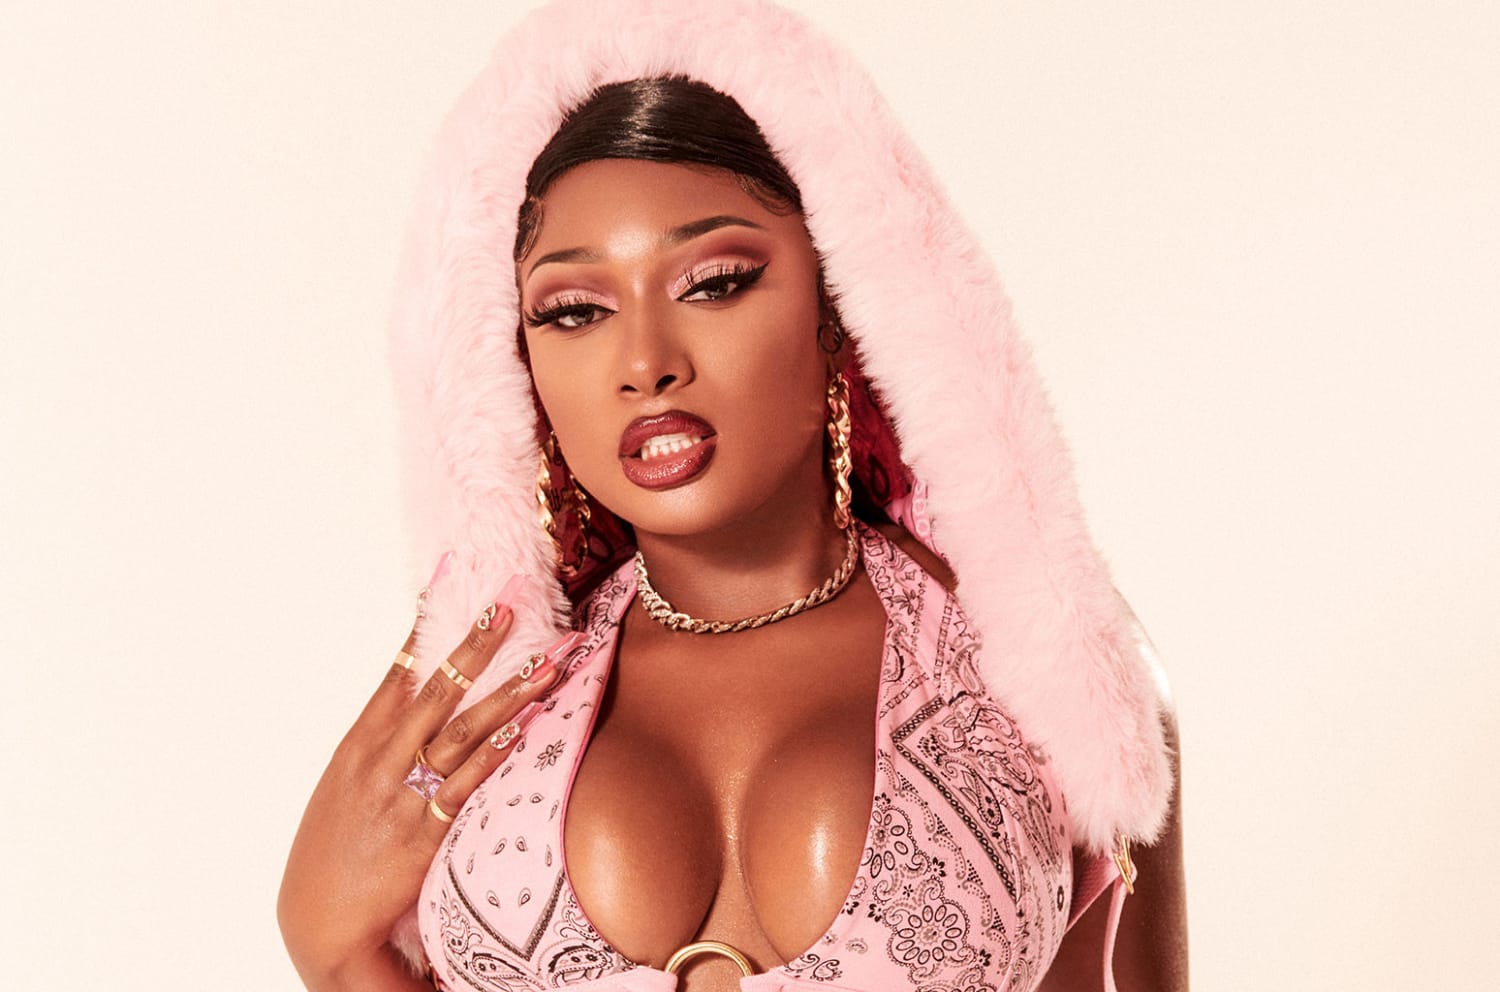 Kerry Washington Is 'Fangirling' Over Megan Thee Stallion's 'Scandal'-Inspired Lyric